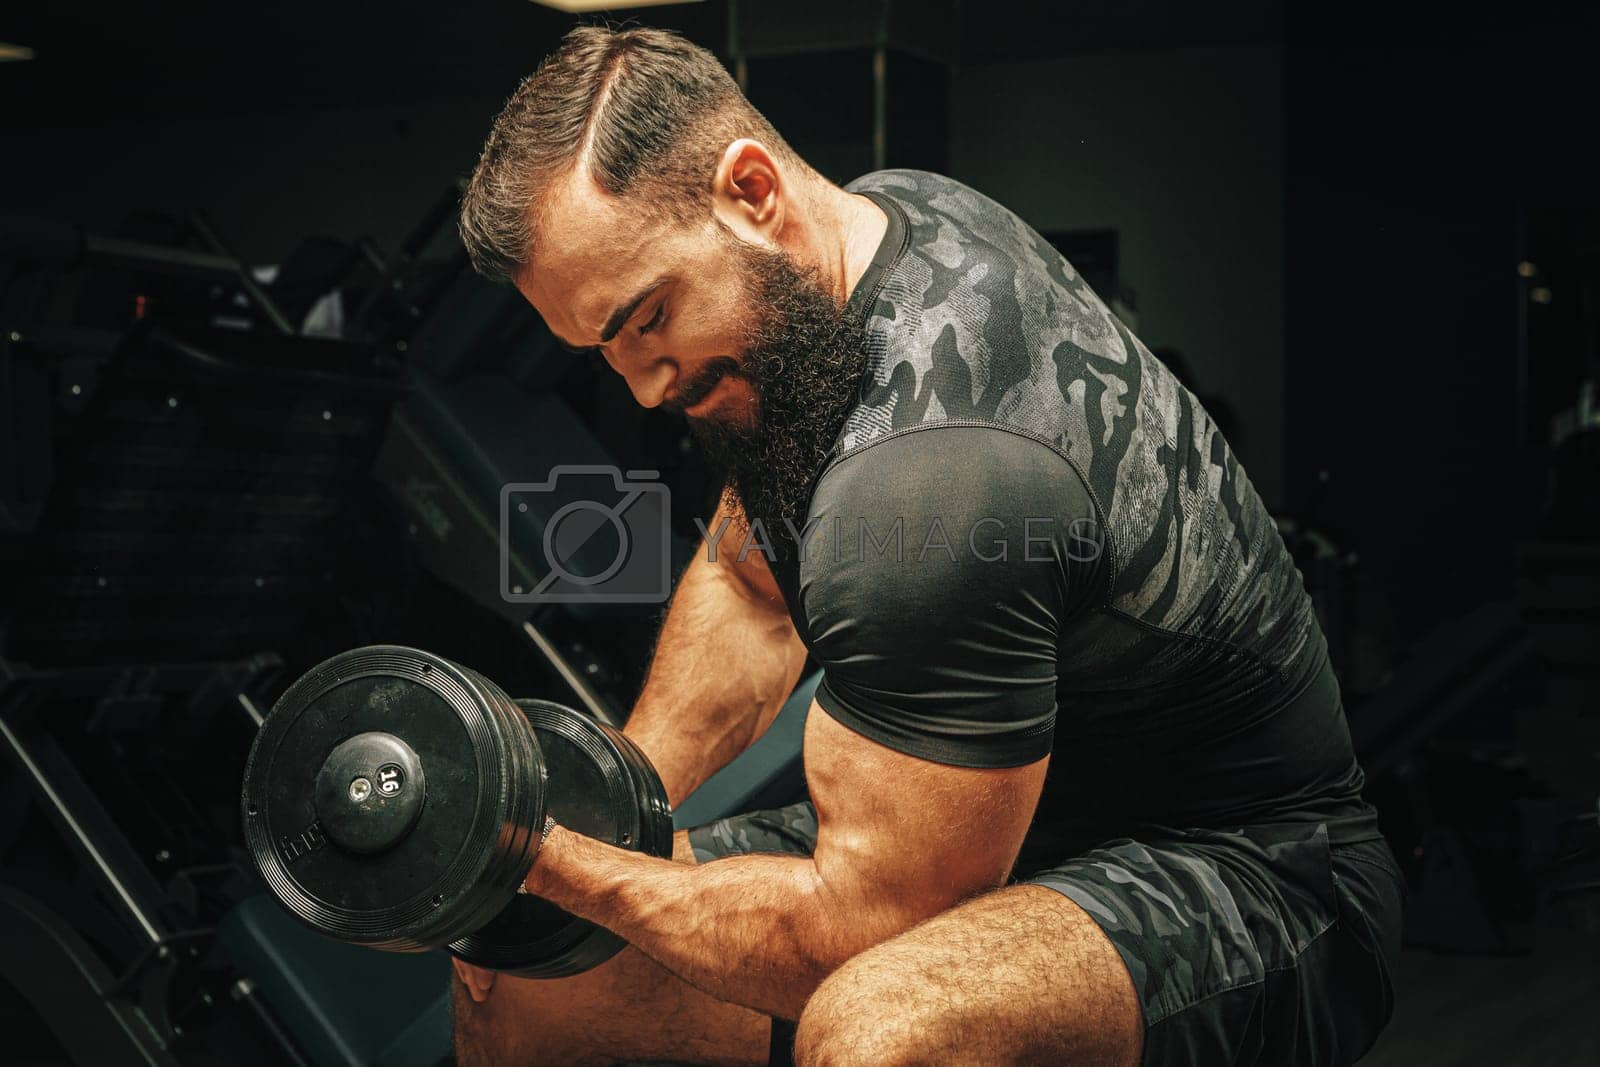 Royalty free image of Male with sport body lifting dumbbells at the gym by Fabrikasimf